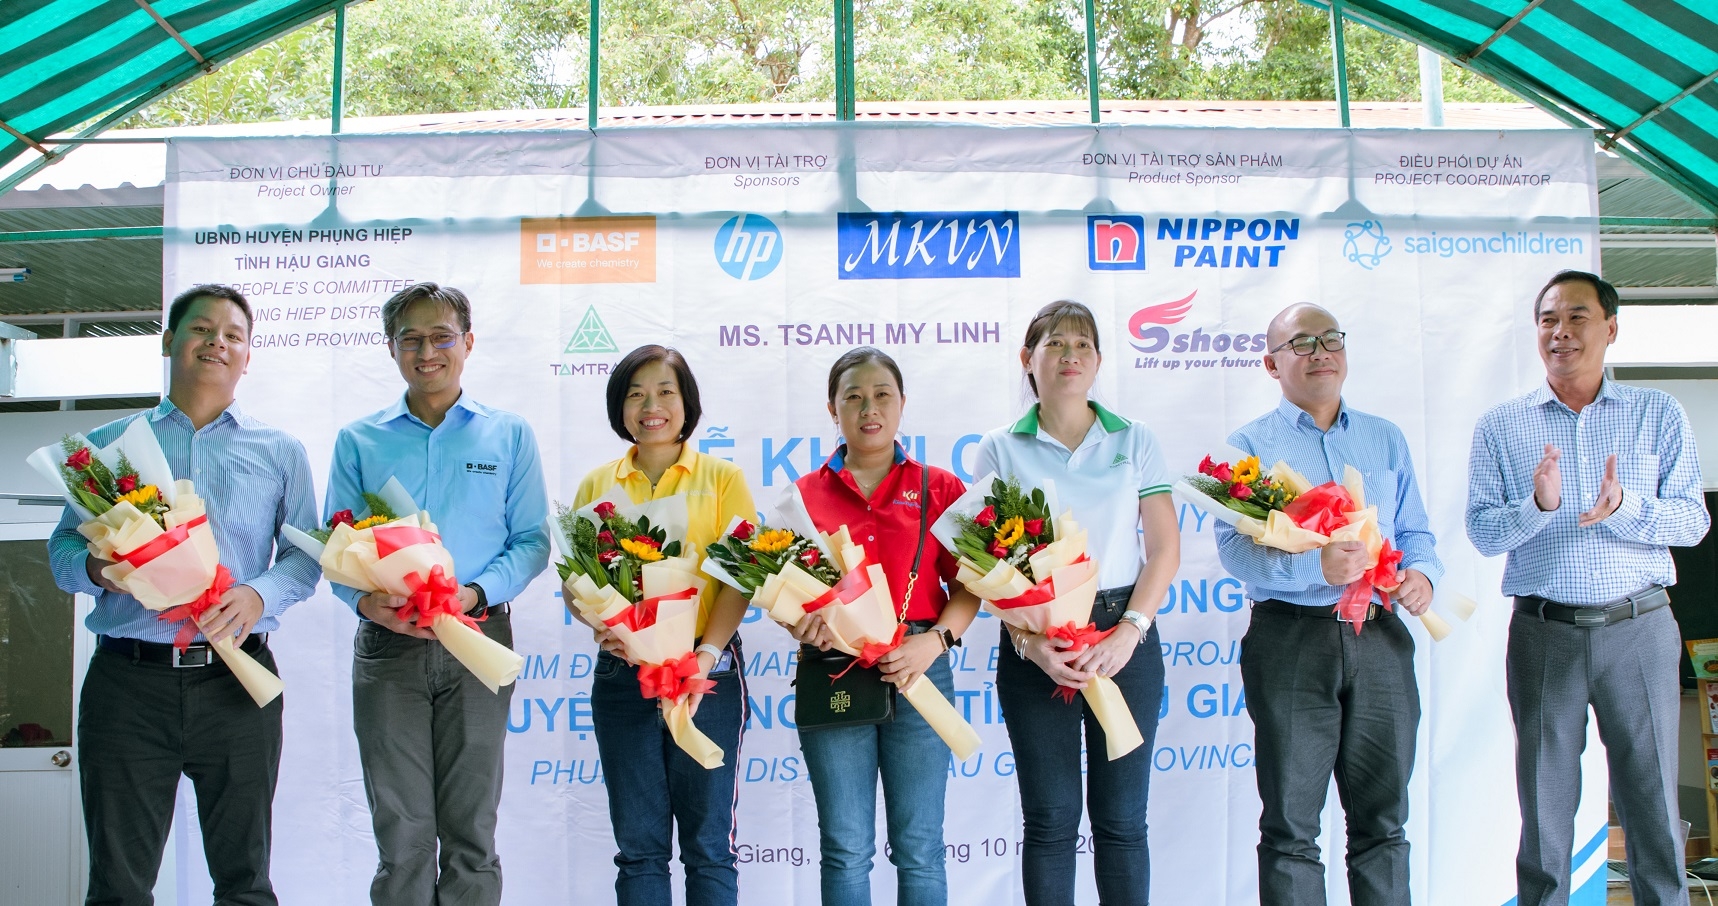 basf partners up with customers to rebuild school in remote area in hau giang vietnam